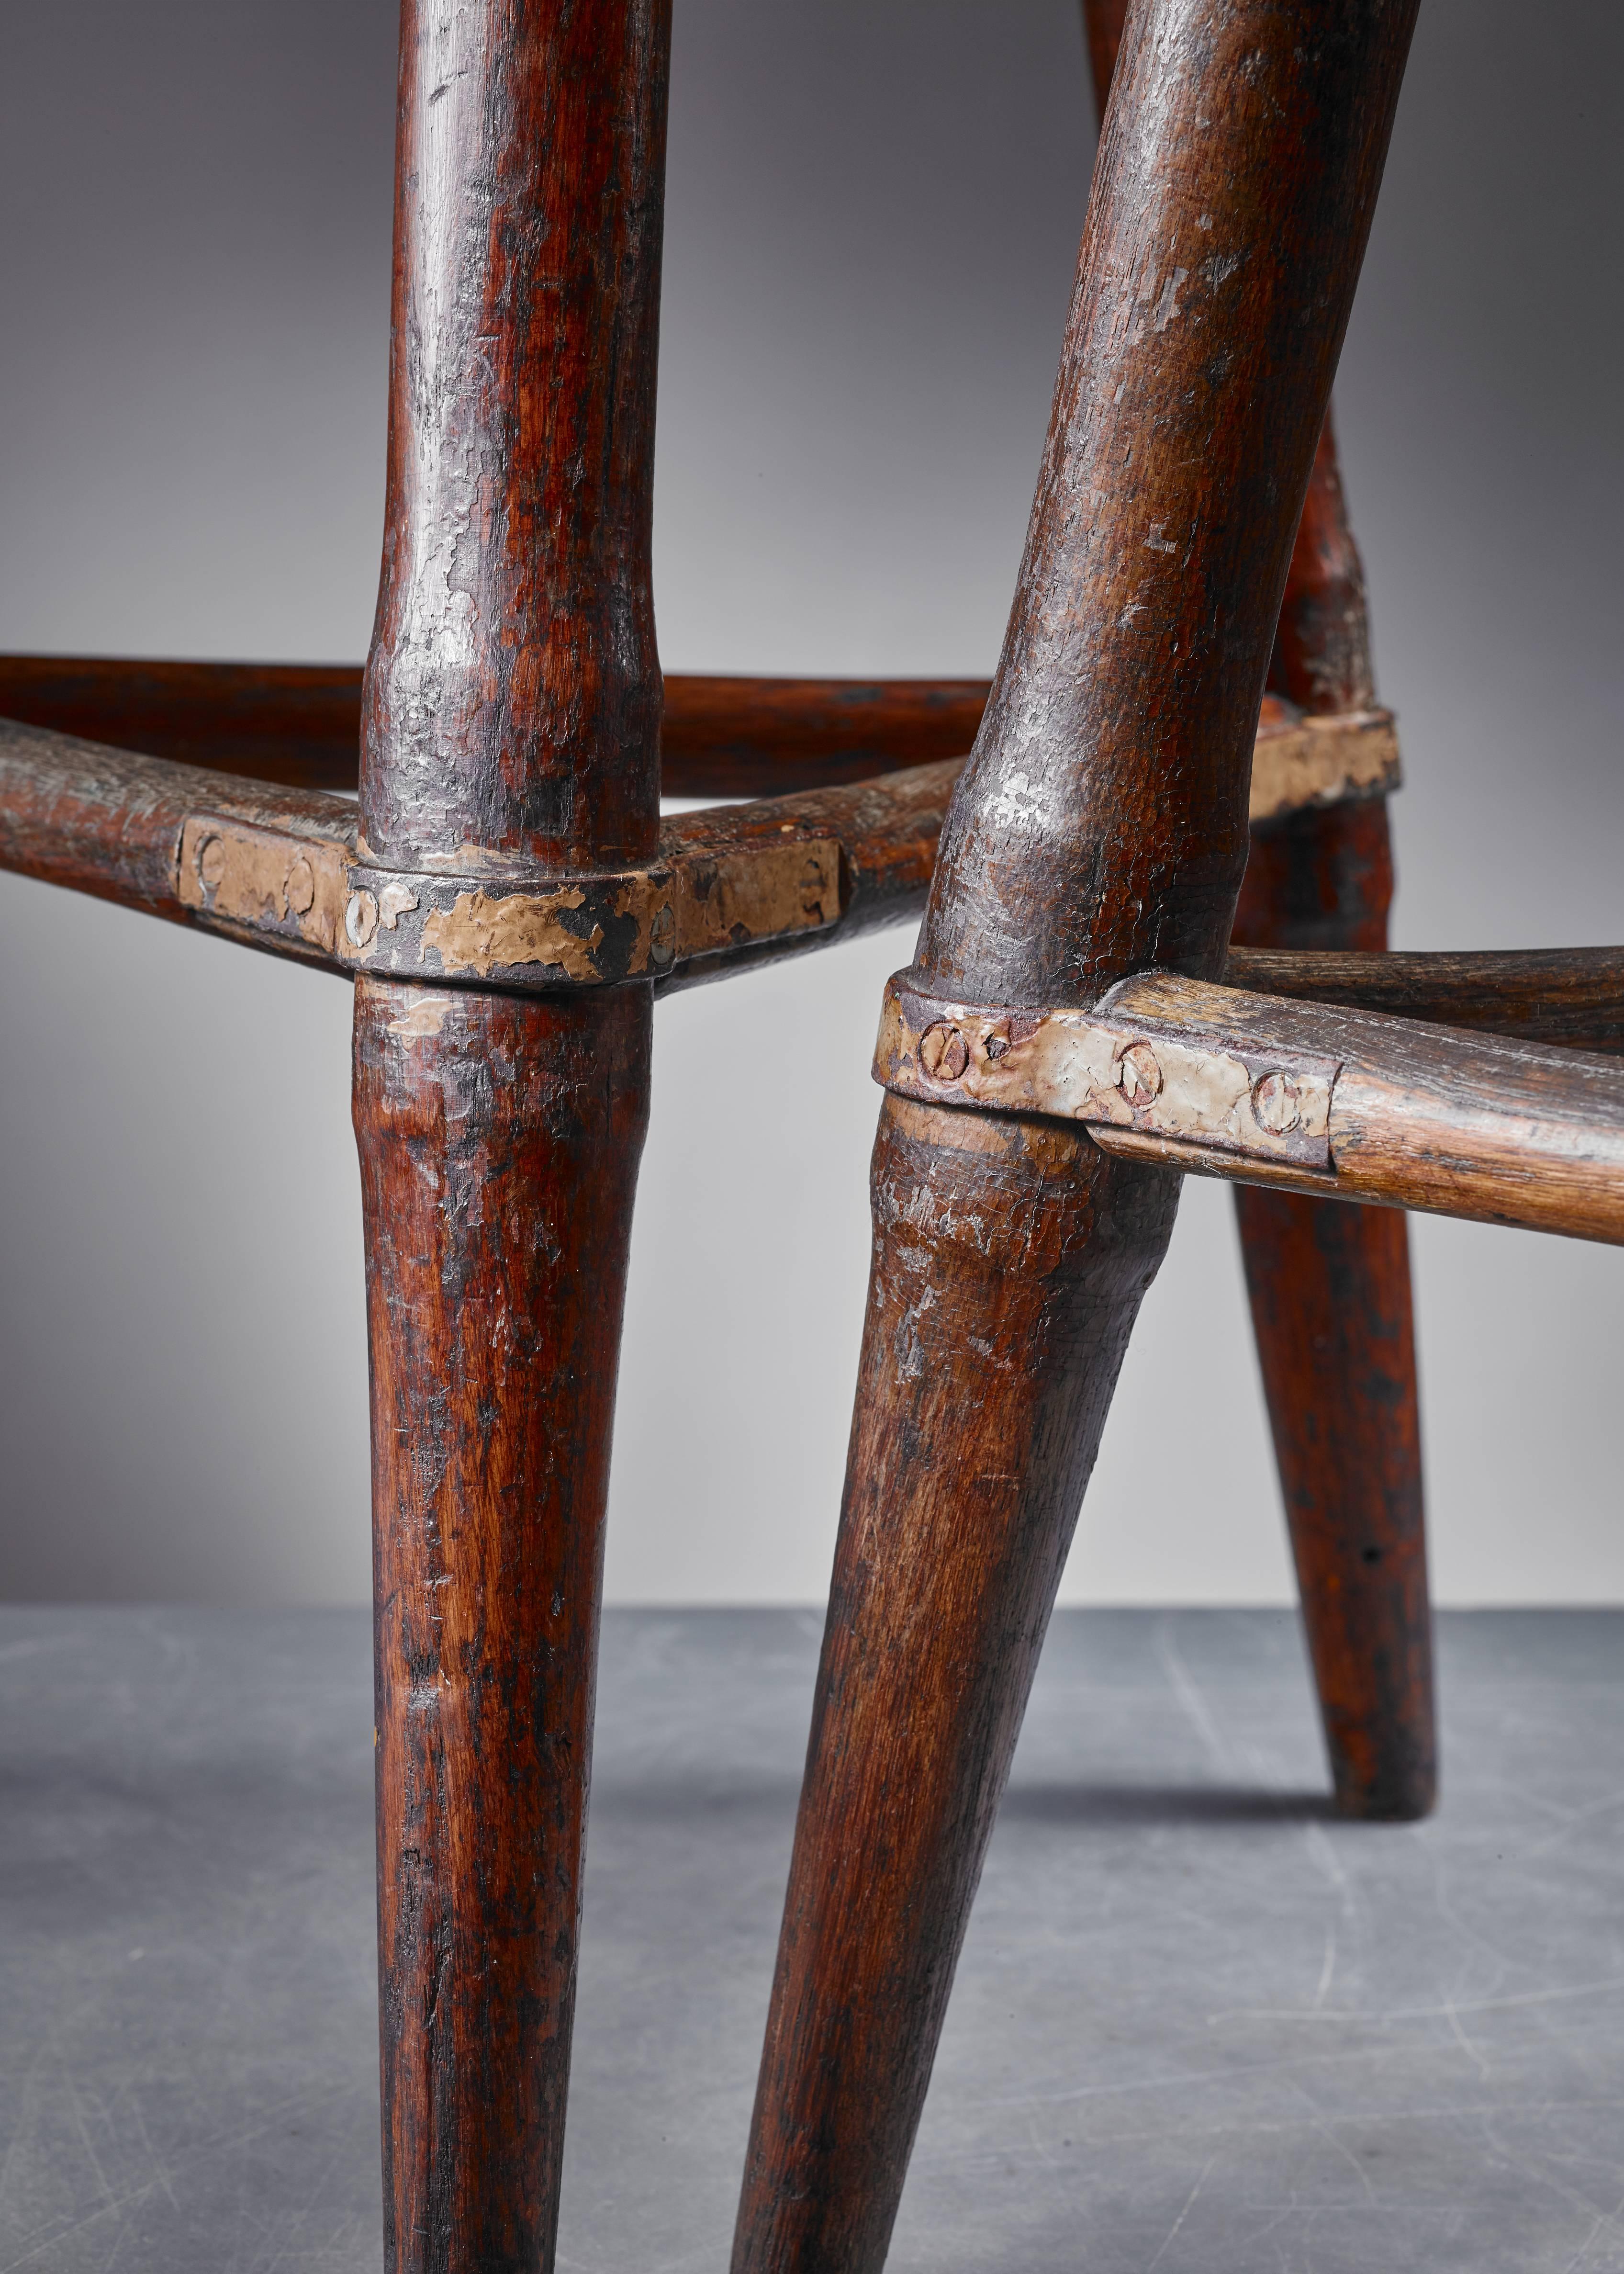 Swedish Pair of High Scandinavian Wooden Tripod Stools with Iron Connections, 1930s For Sale